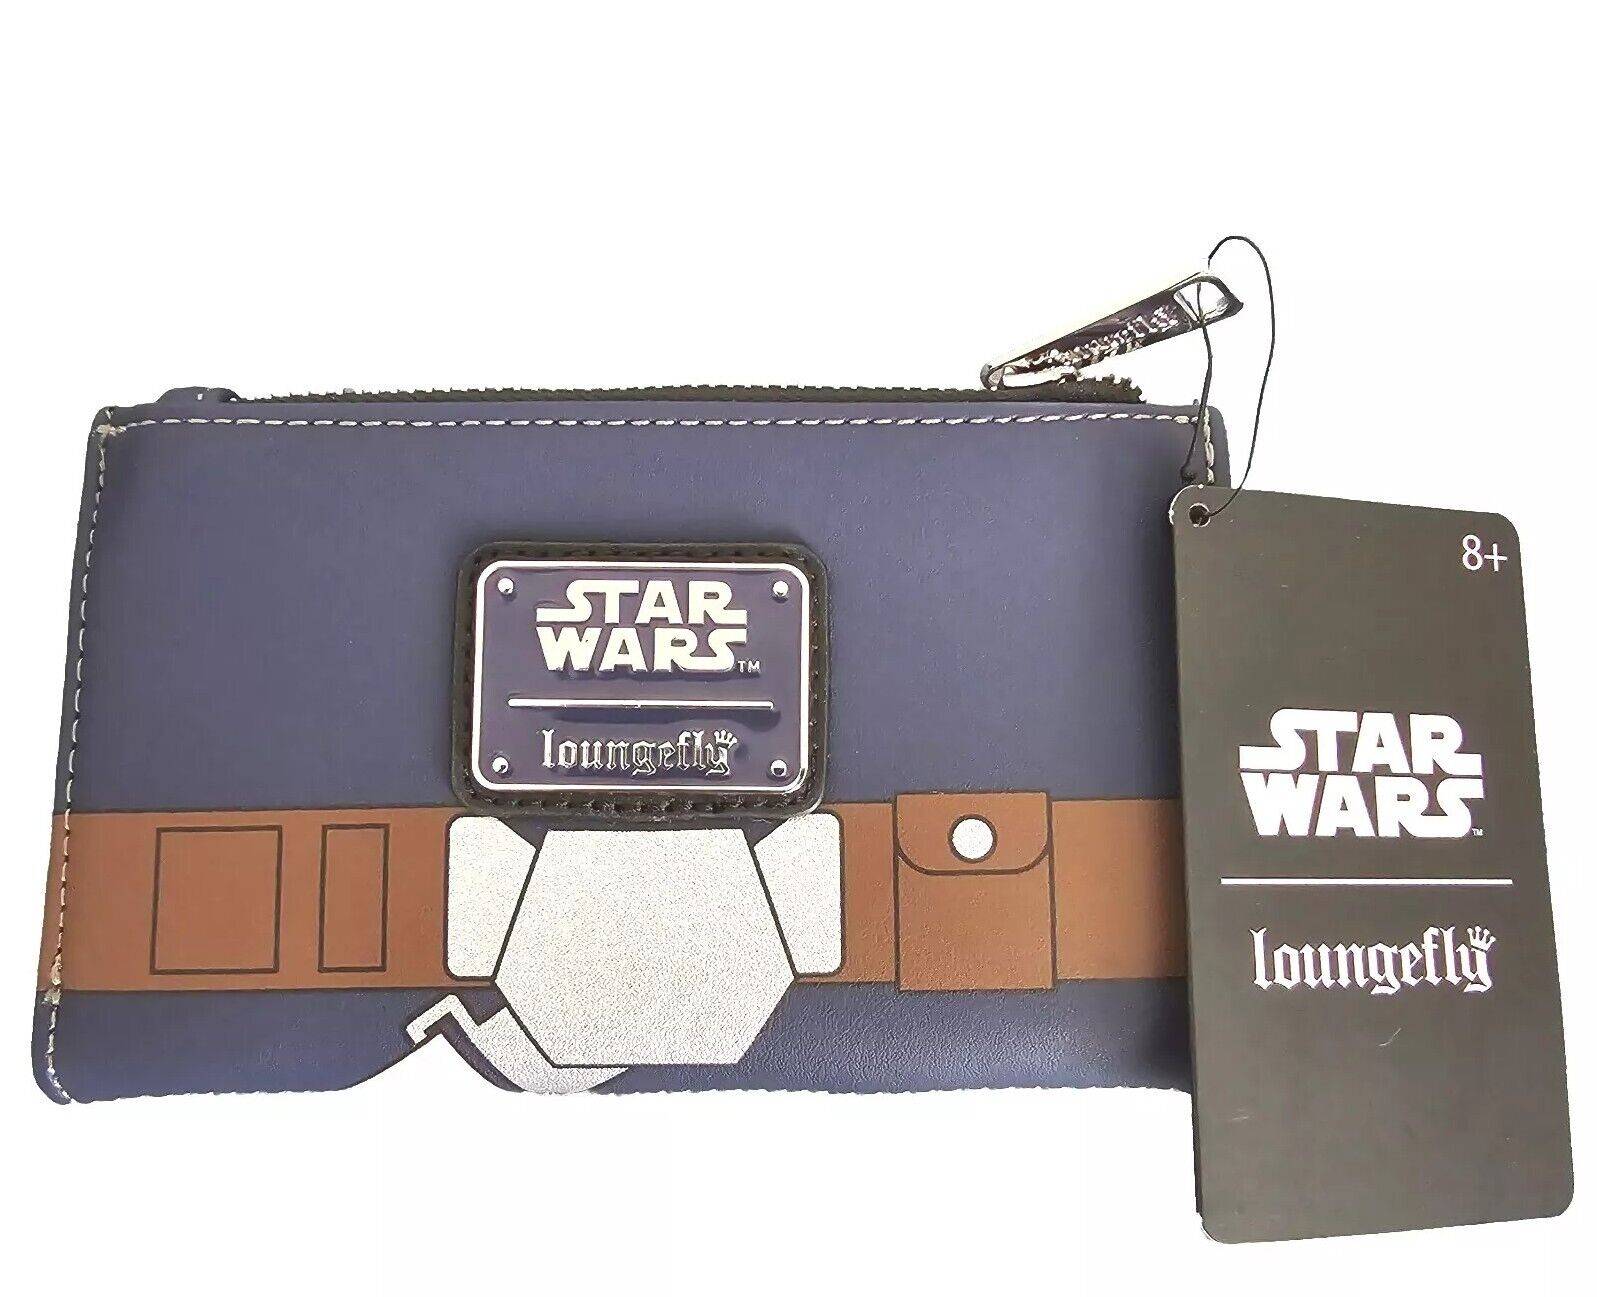 NWT Loungefly Star Wars Hans Solo Cosplay Flap Wallet. Excellent Conditon